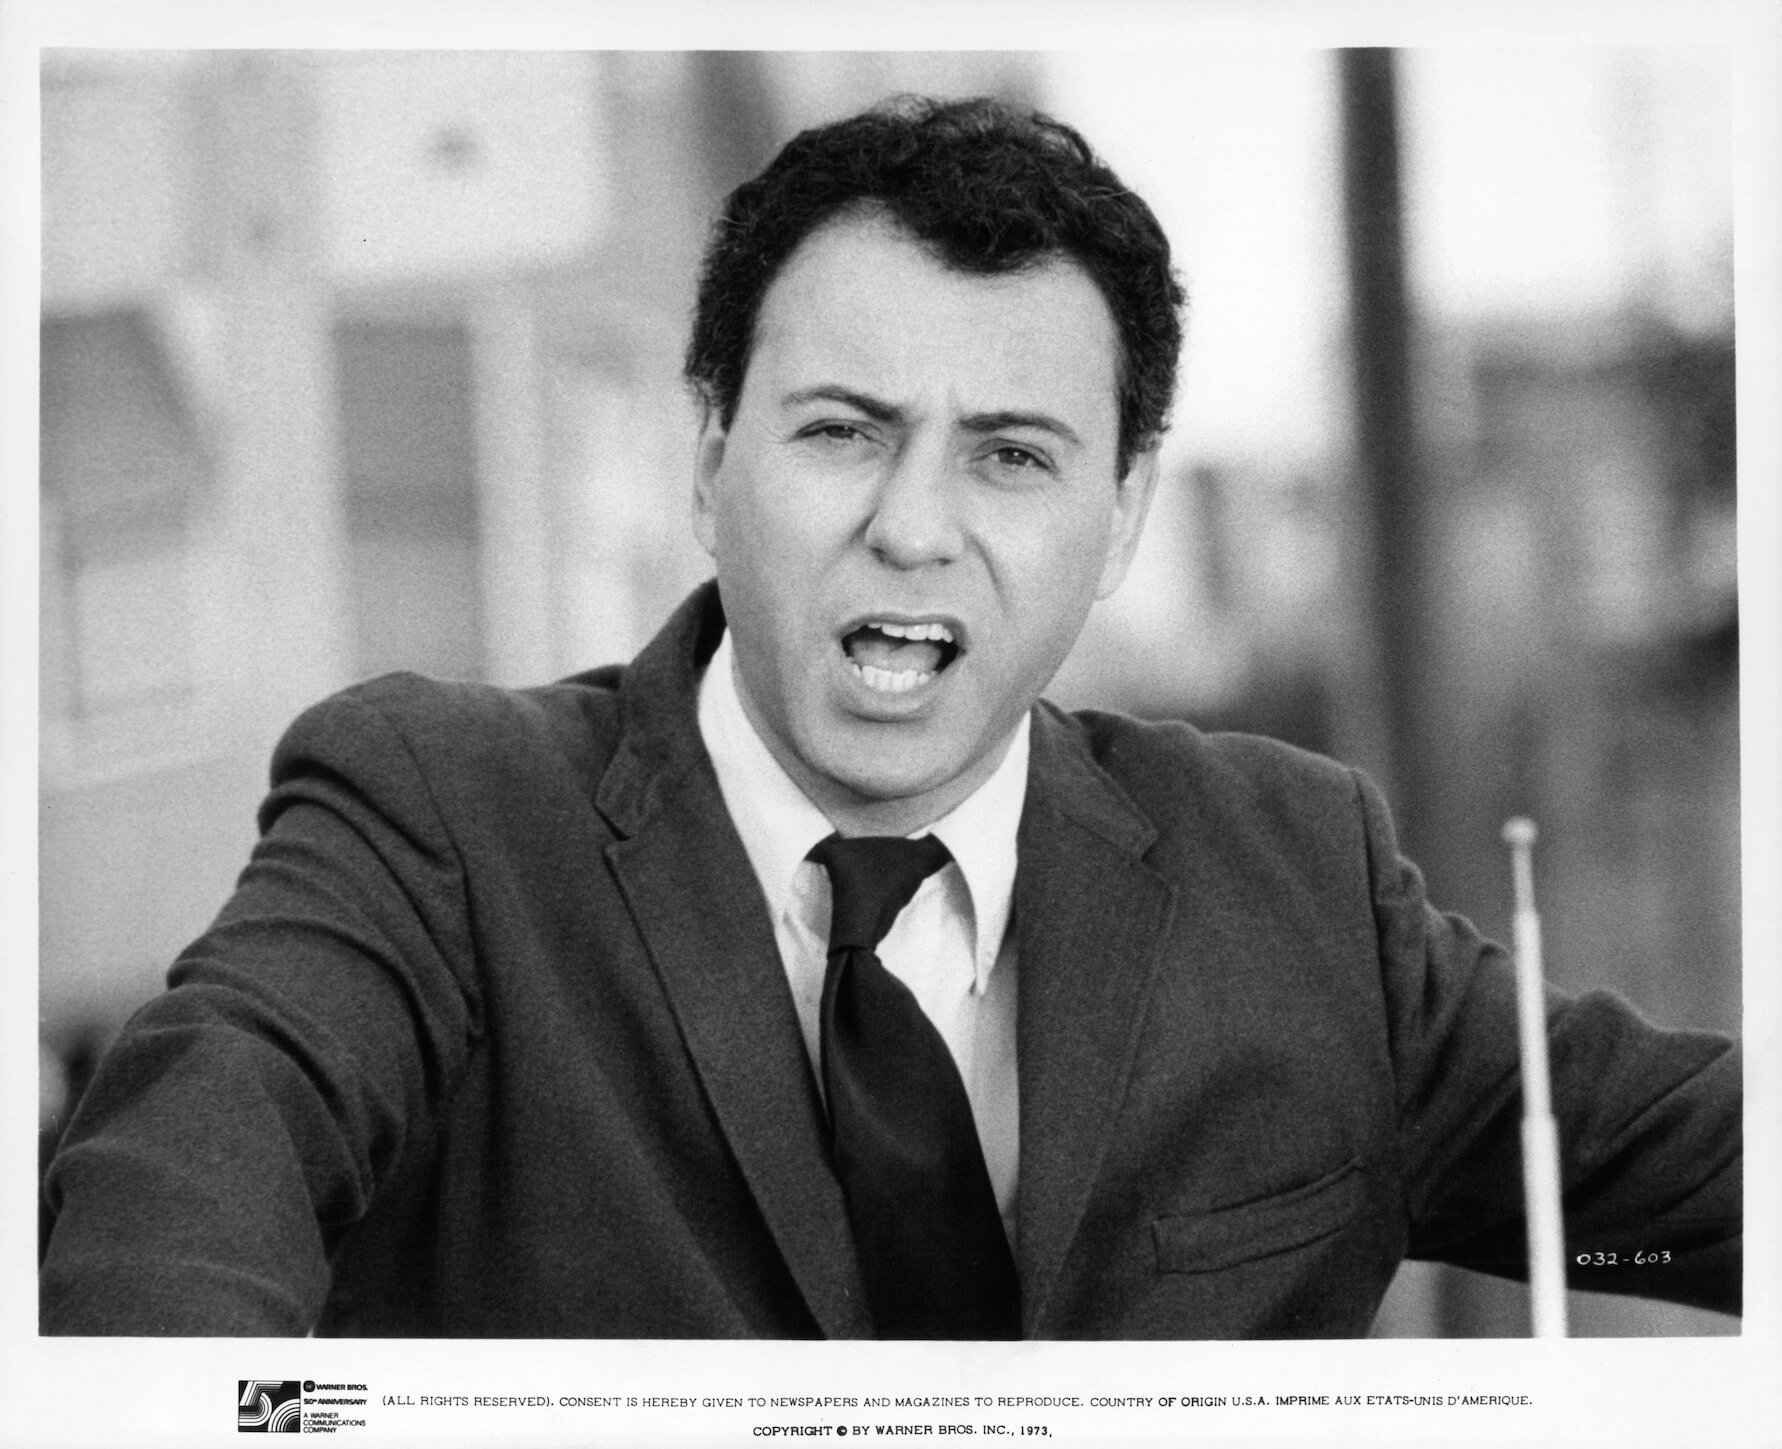 A black and white phoot of actor Alan Arkin